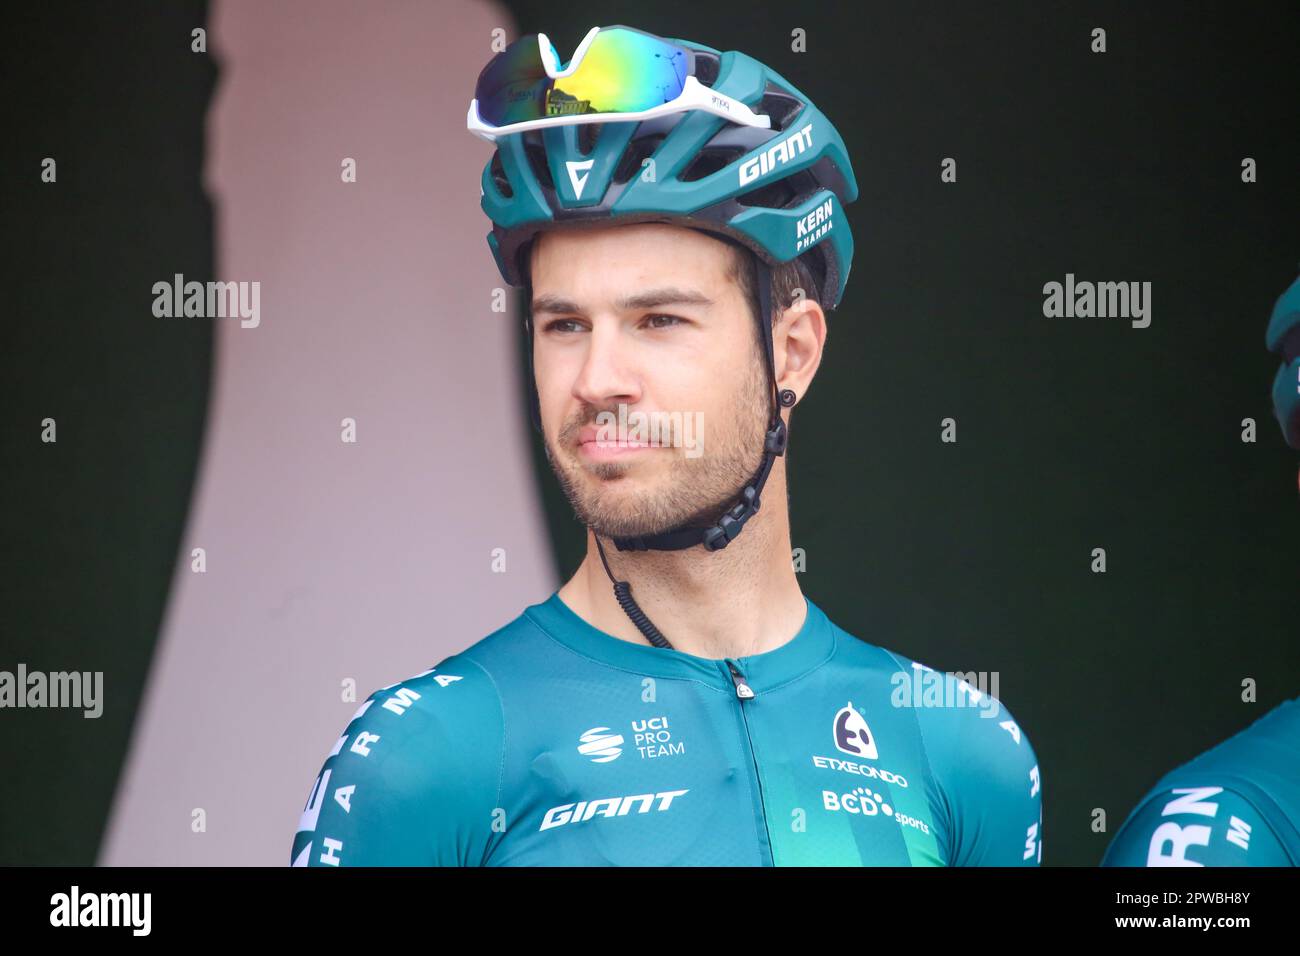 Candas, Spain, 29th April, 2023: The rider of the Kern Pharma Team, Hector Carretero during the 2nd stage of the Vuelta a Asturias 2023 between Candas and Cangas del Narcea, on April 29, 2023, in Candas, Spain. Credit: Alberto Brevers / Alamy Live News Stock Photo